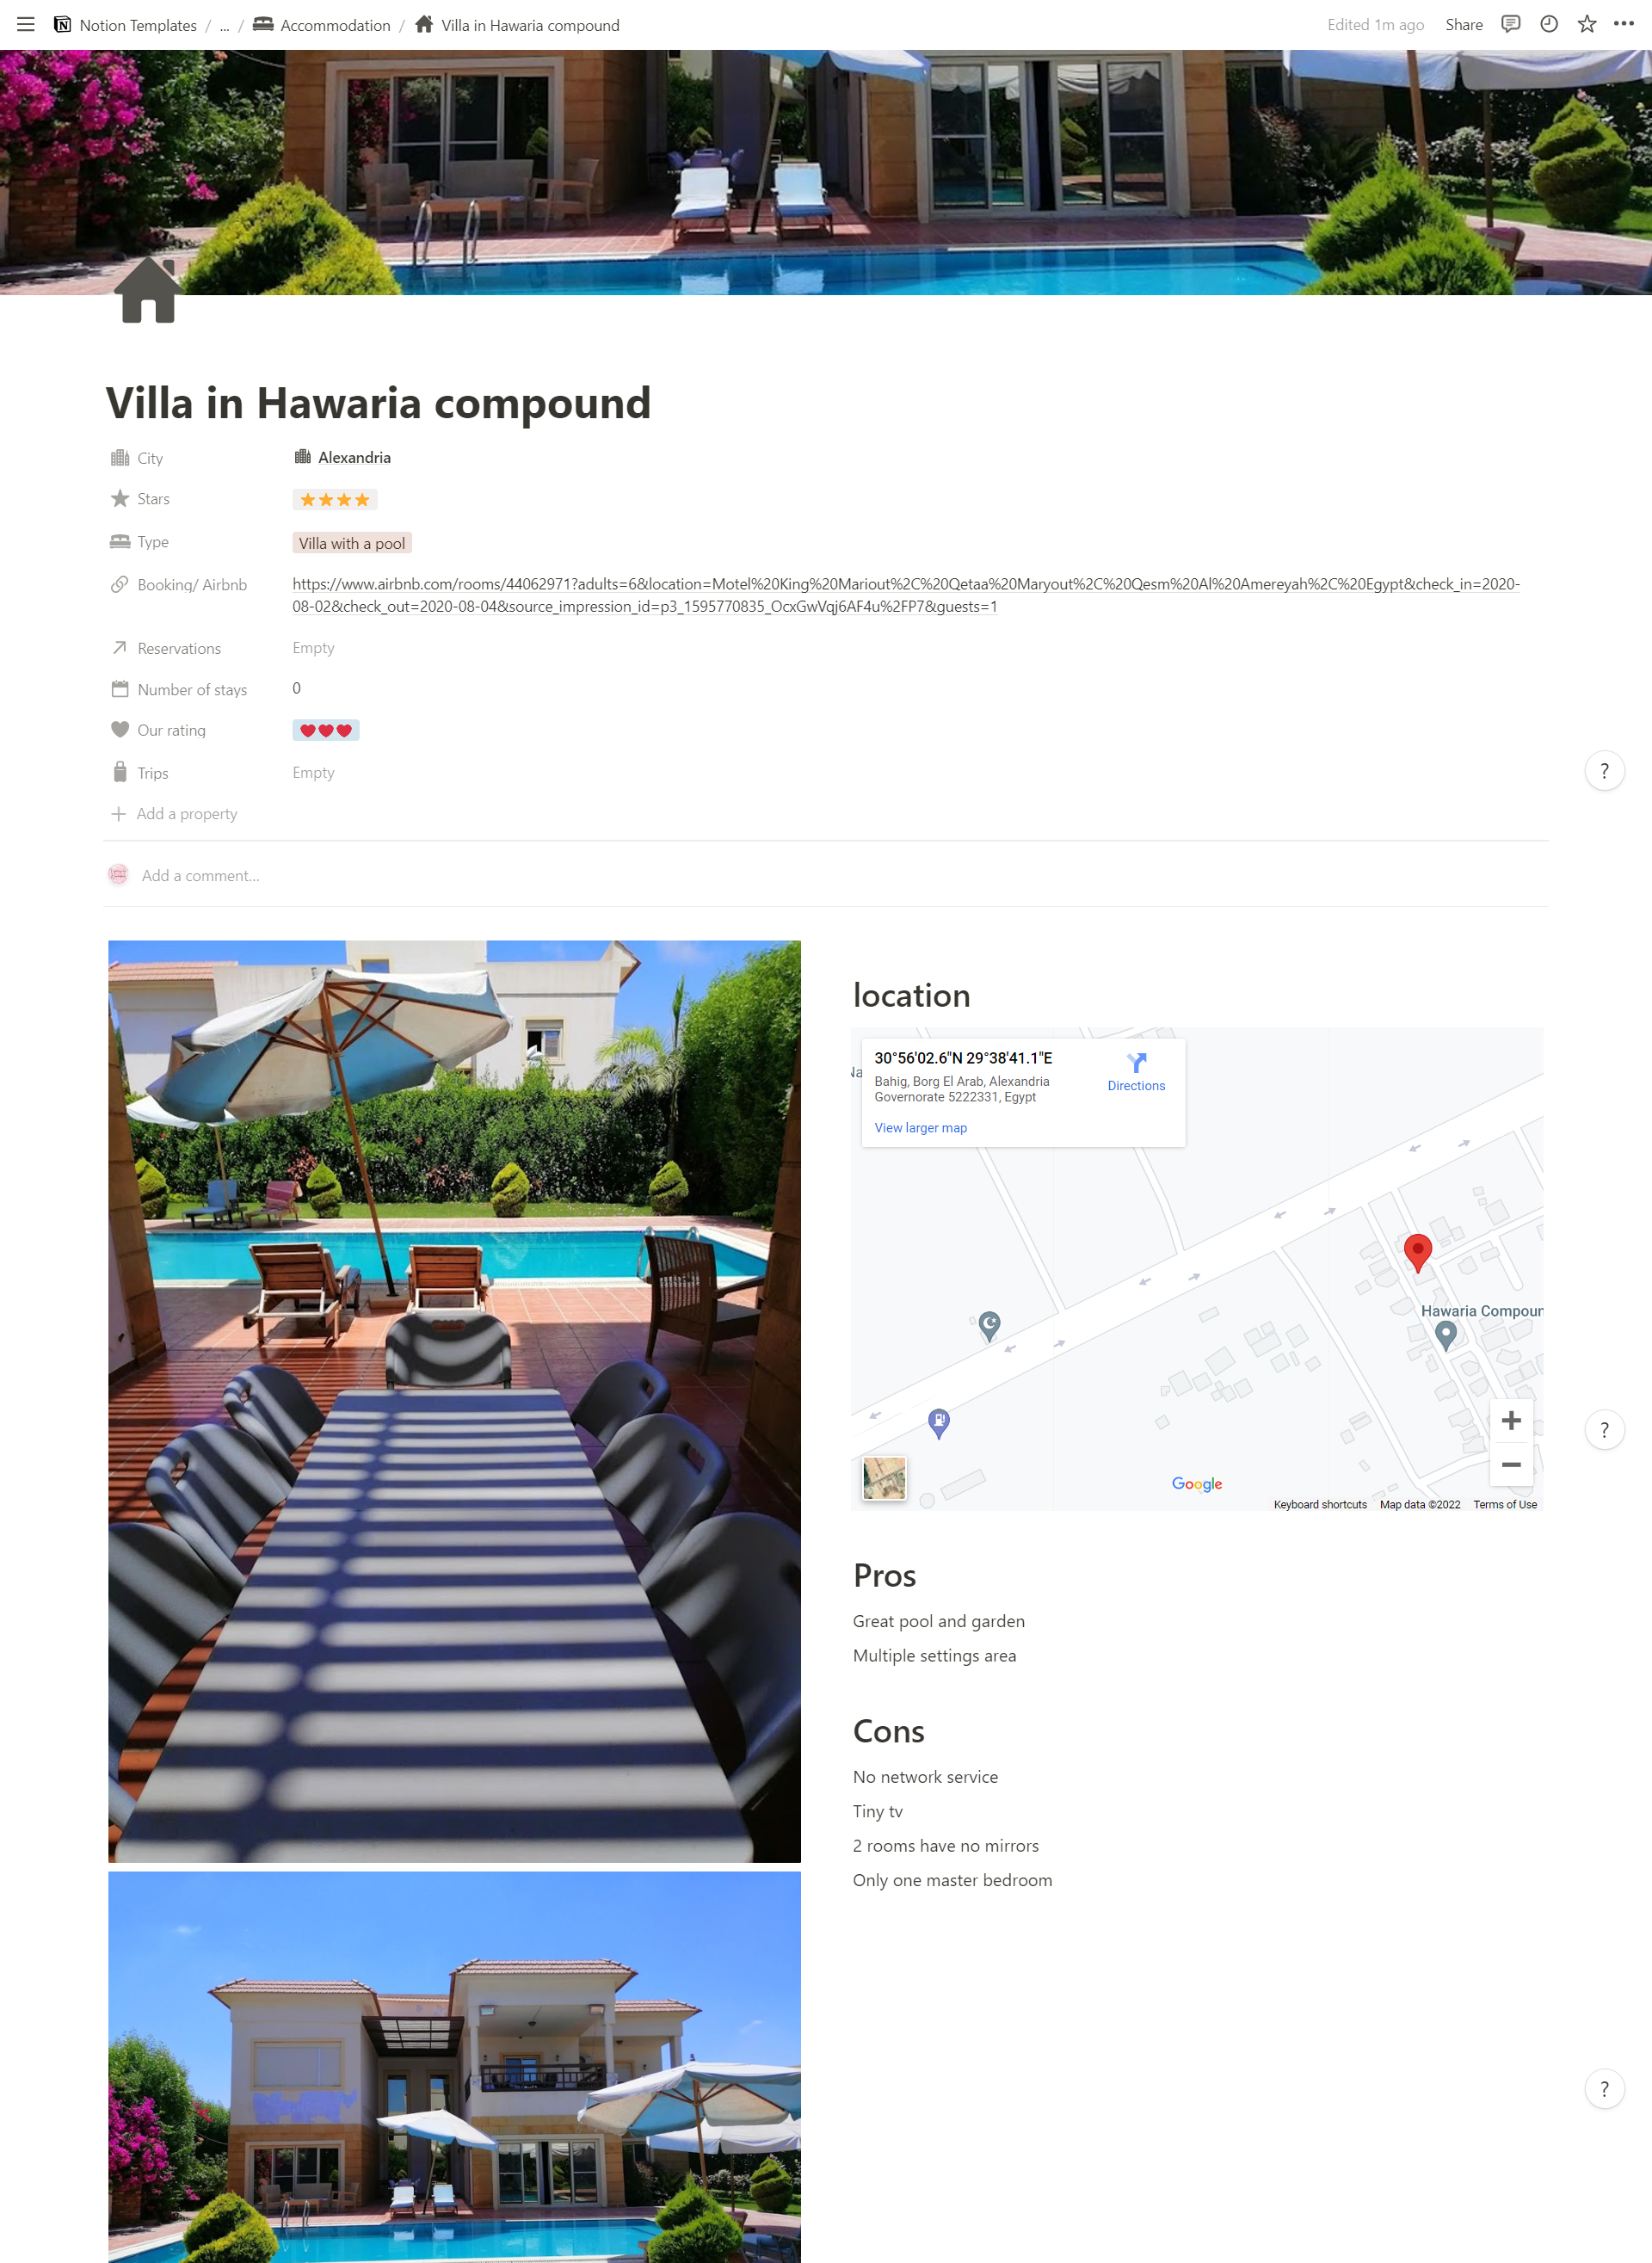 Notion Travel Planner : Hotel template showing pictures of the hotel, its location and a list of pros and cons